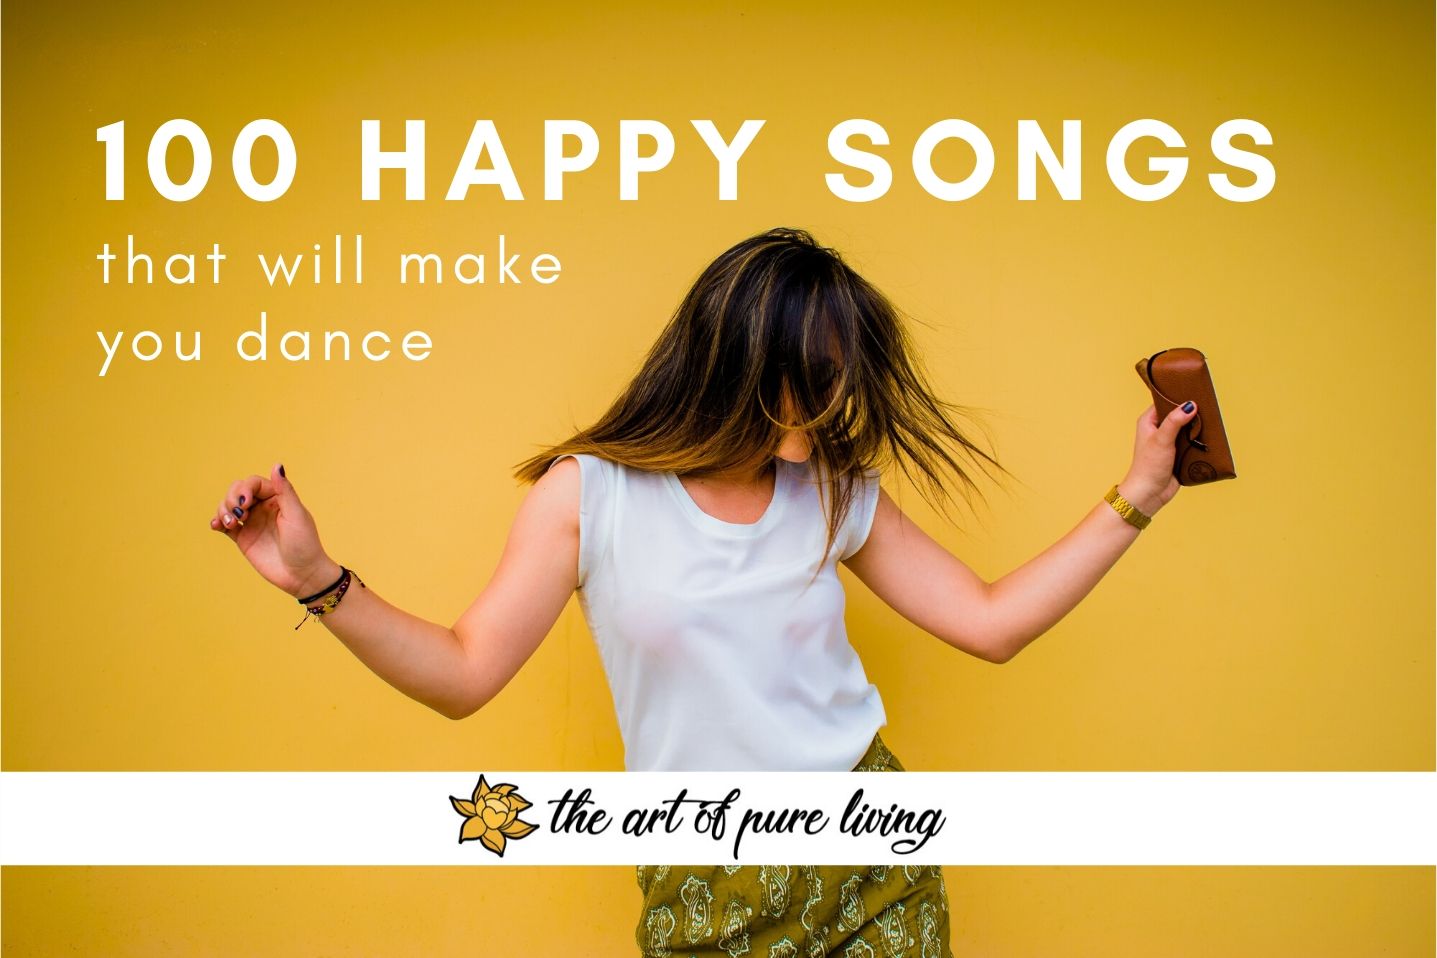 Songs That Make You Smile 100 happy songs that will make you dance - Art of Pure Living